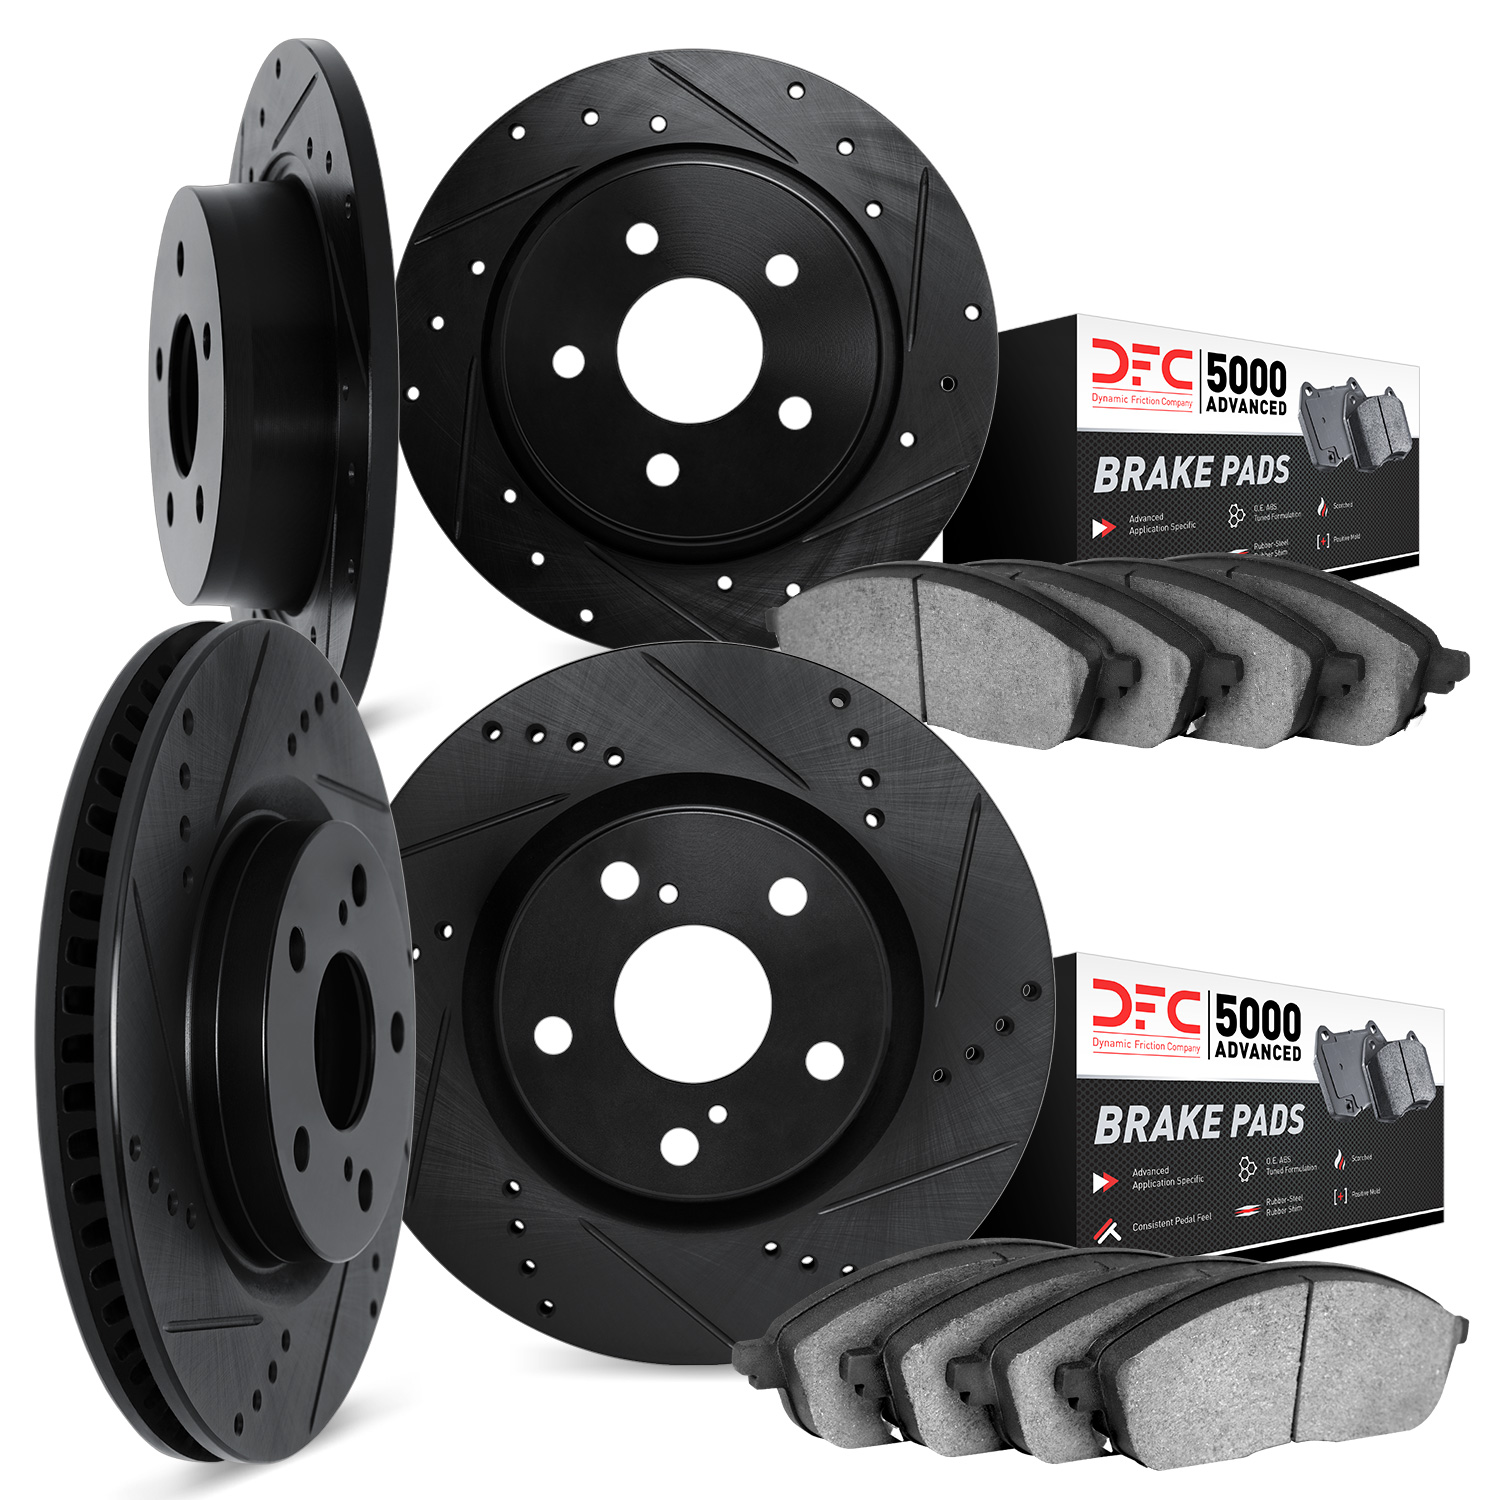 8504-39038 Drilled/Slotted Brake Rotors w/5000 Advanced Brake Pads Kit [Black], Fits Select Mopar, Position: Front and Rear